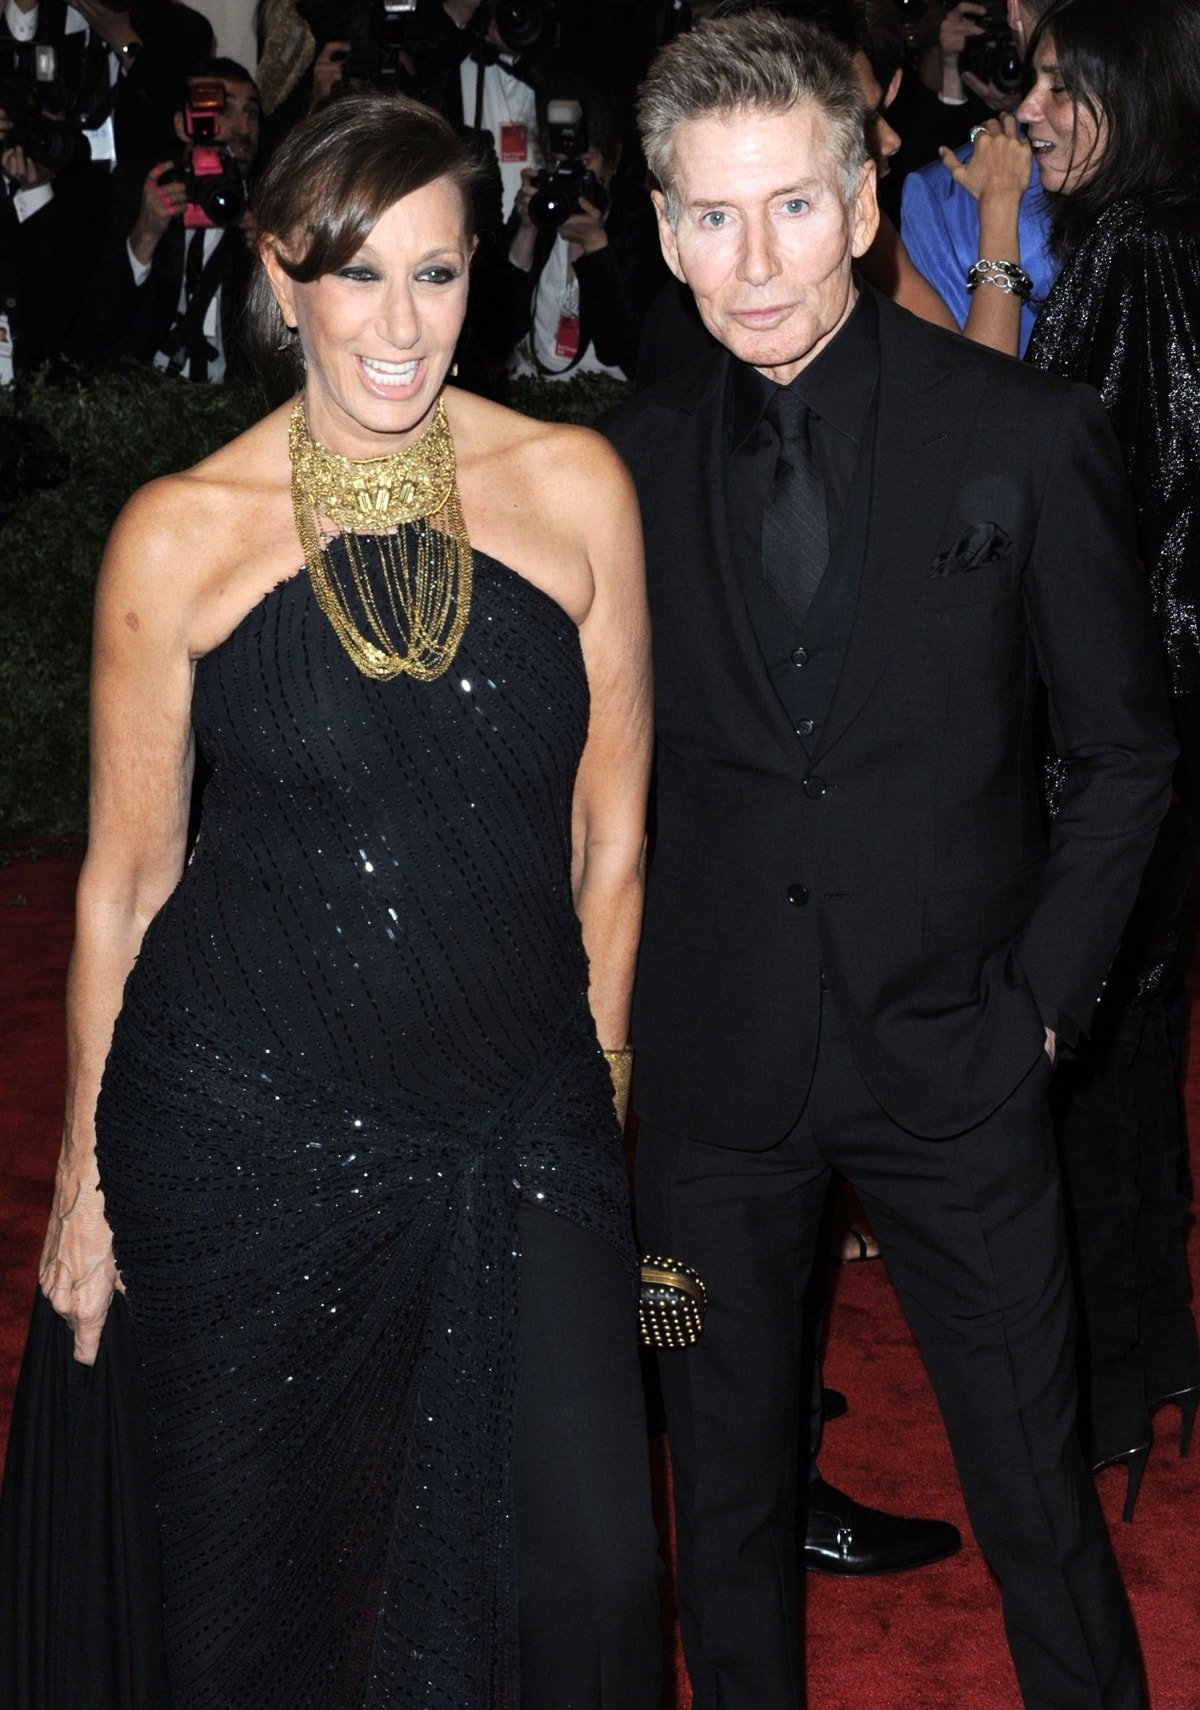 Calvin Klein with Donna Karan at the PUNK: Chaos to Couture Costume Institute Gala